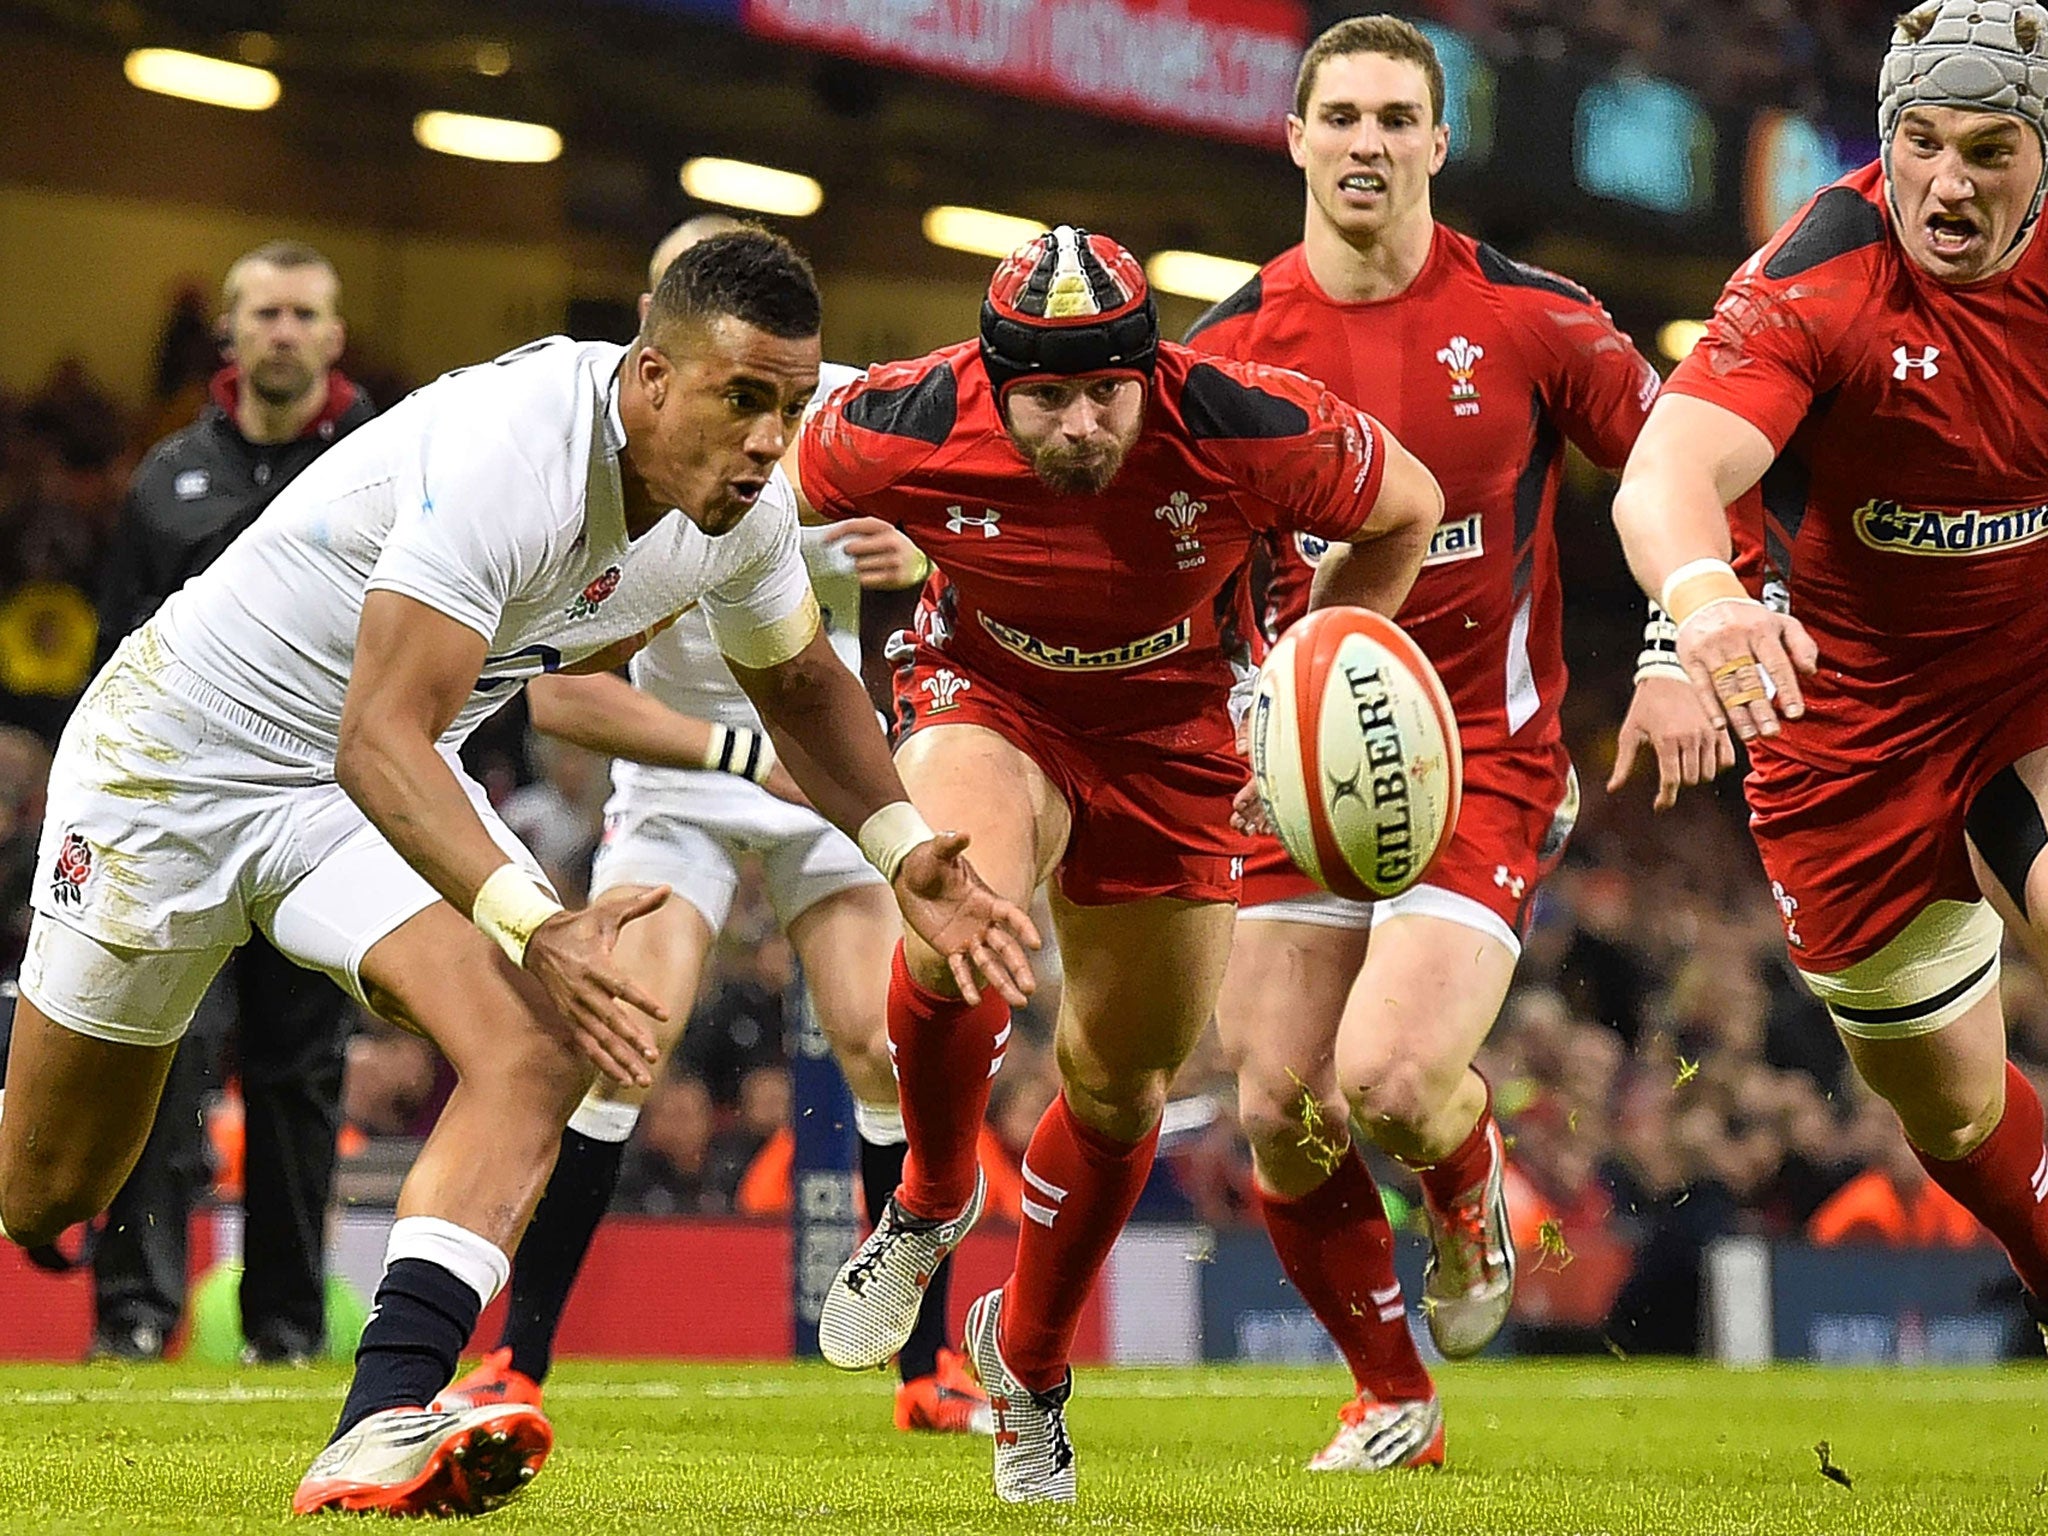 England's wing Anthony Watson (left) collects the ball to score the try